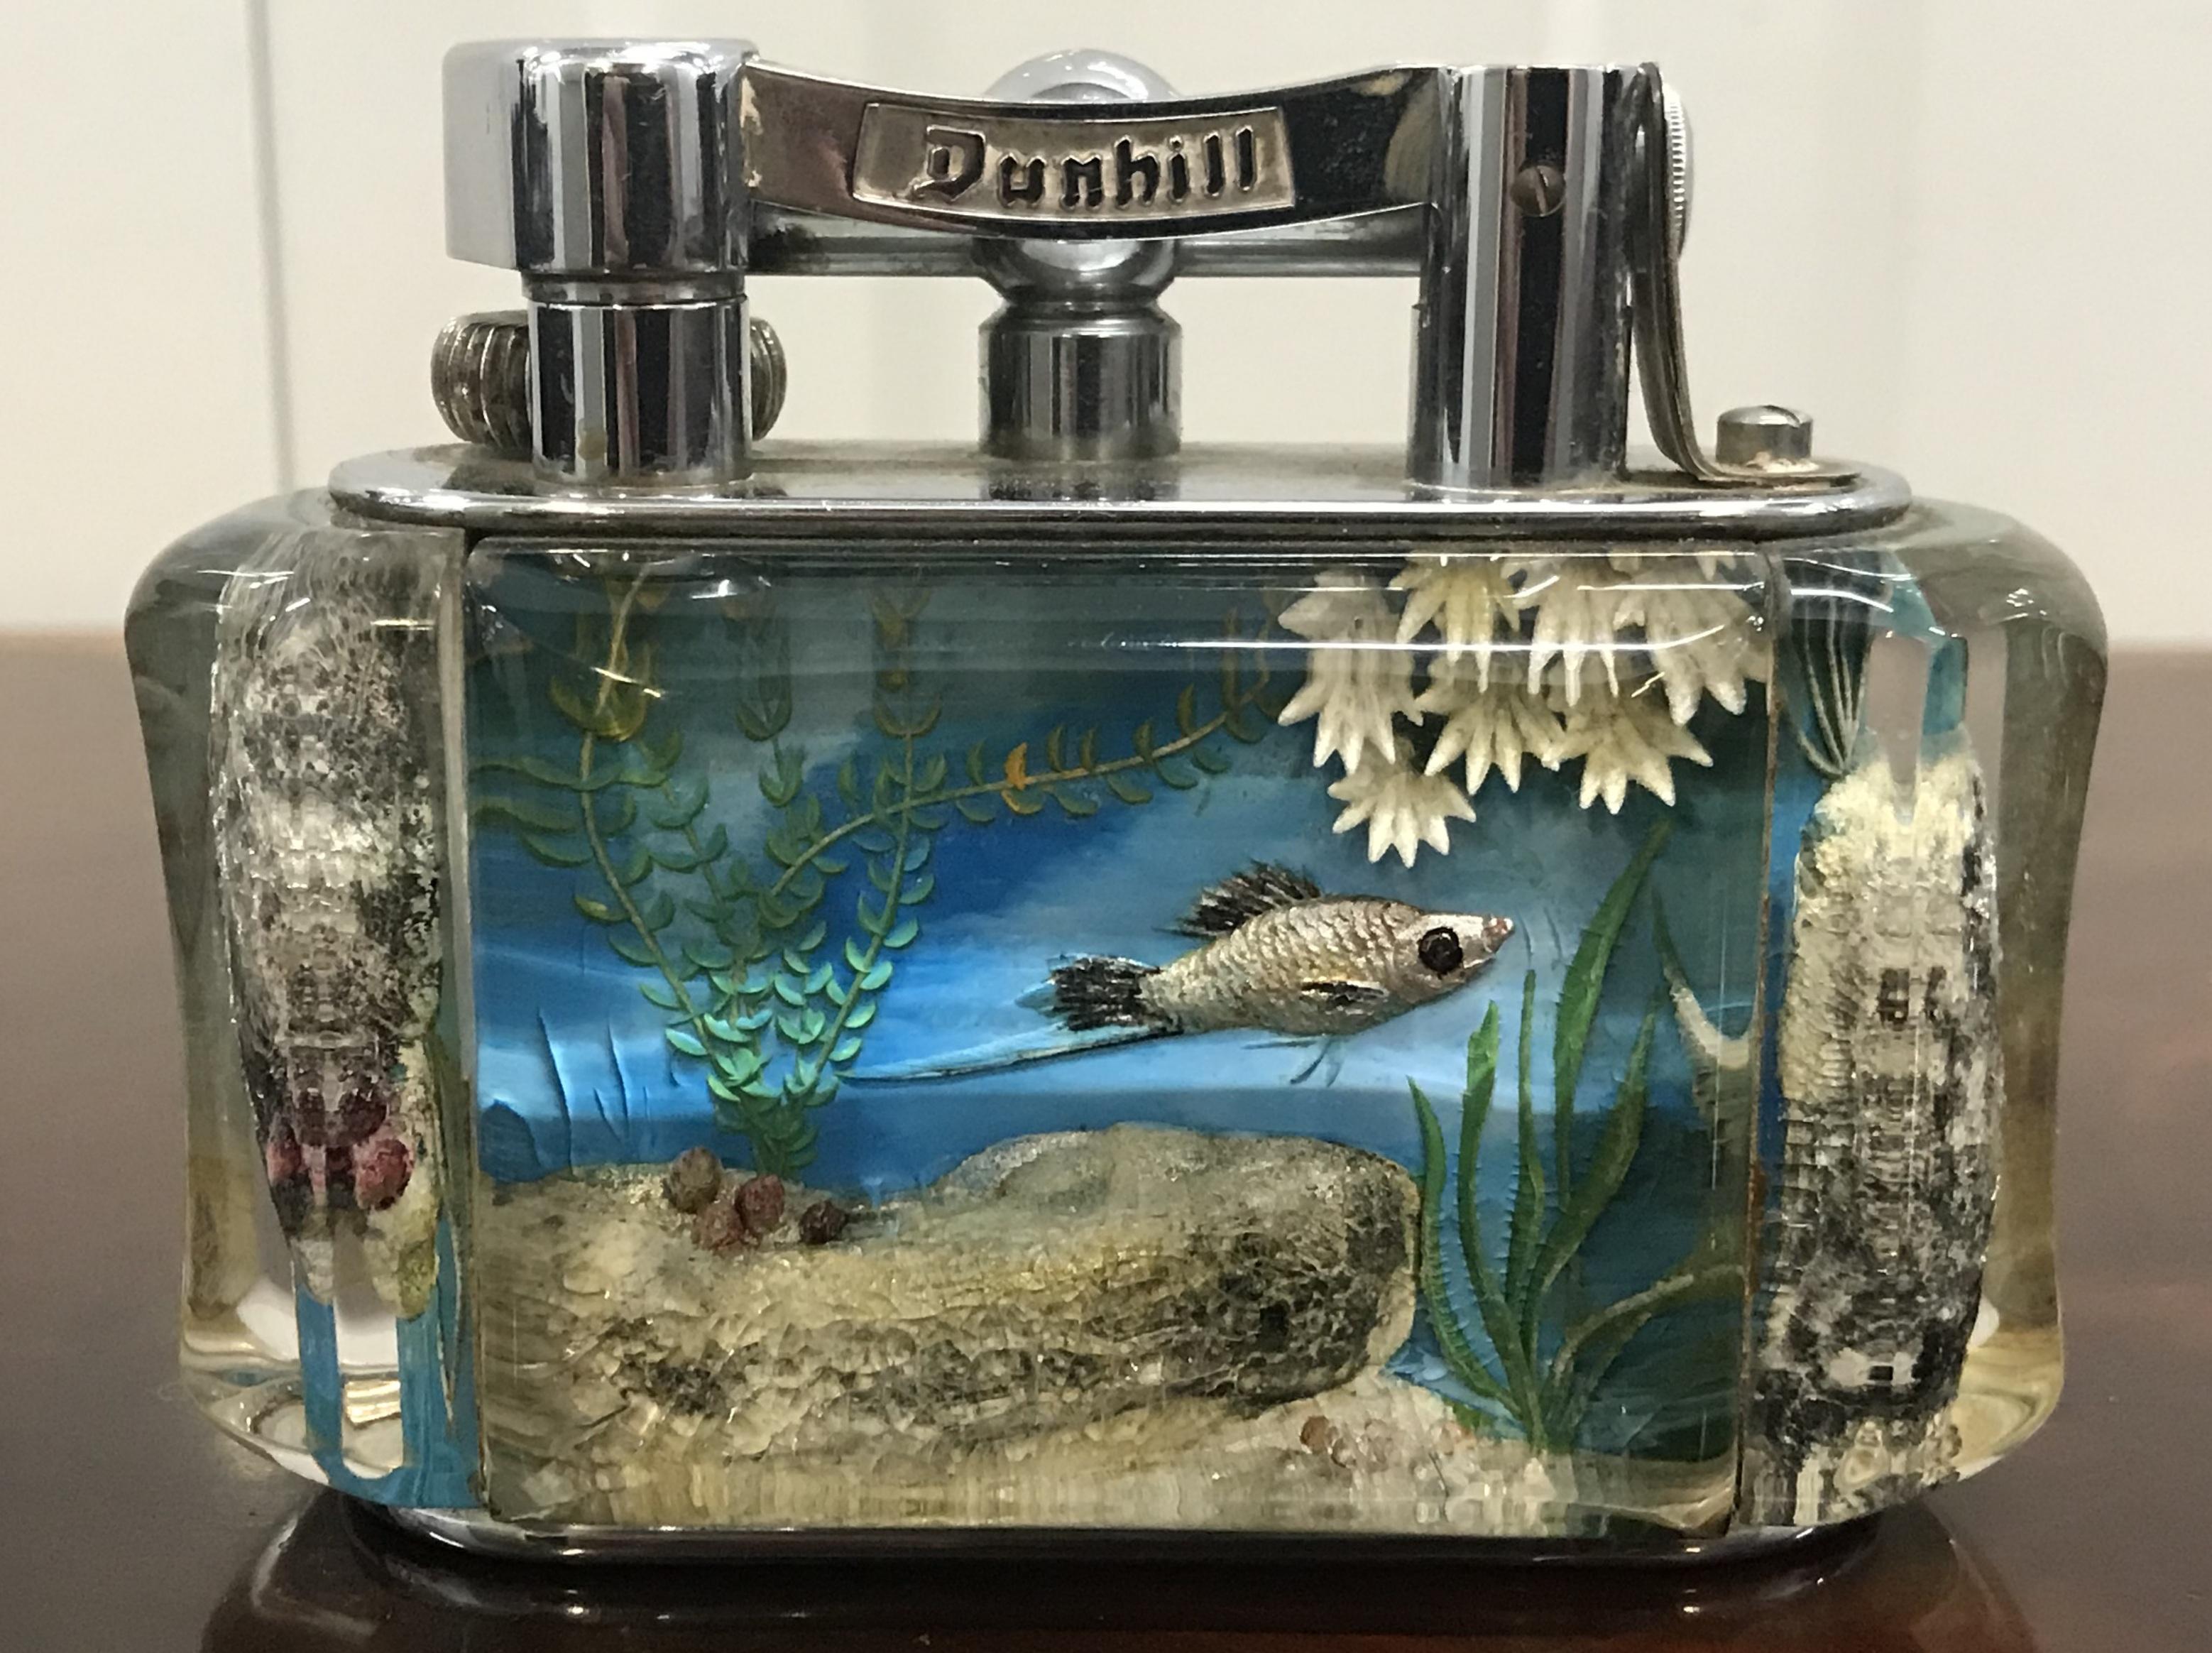 20th Century 1950s Dunhill Aquarium Oversized Table Lighter Made in England Chrome Lots Fish